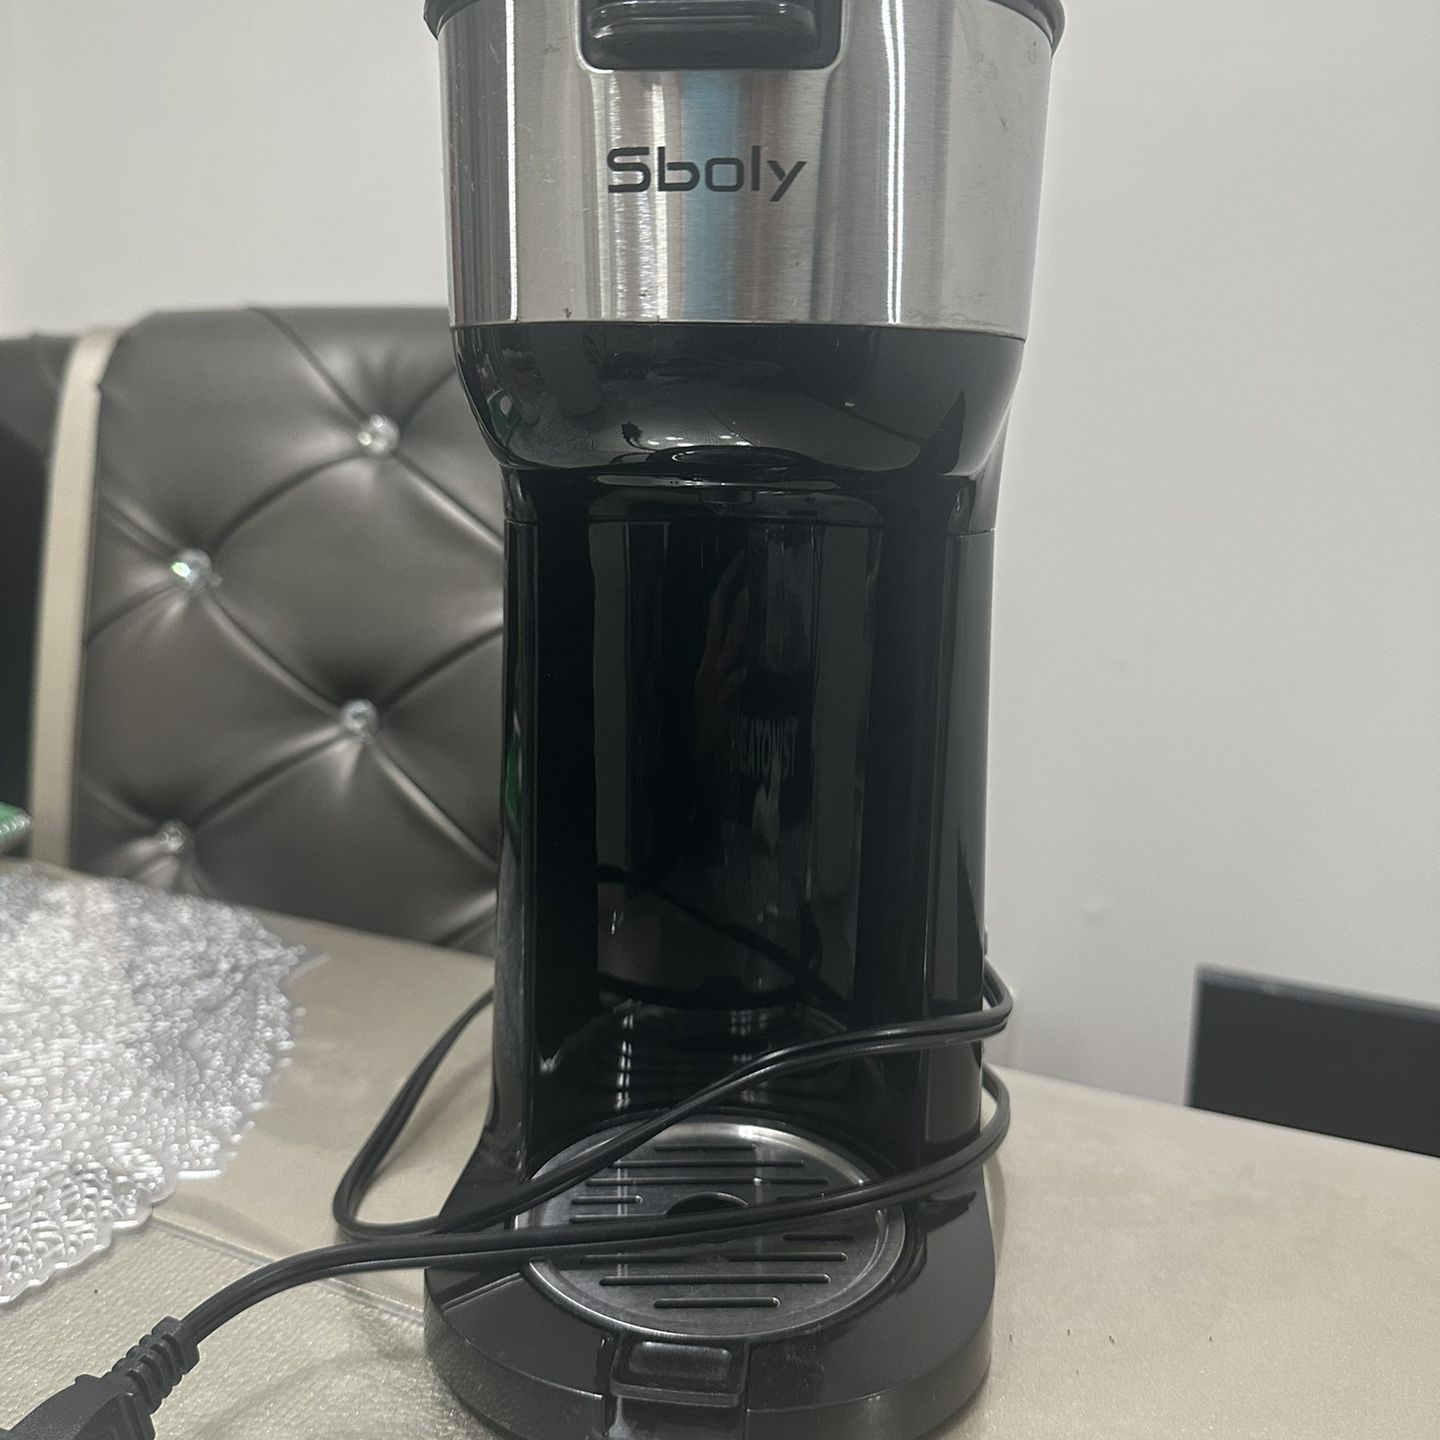 Robo Twist Electric Jar Opener for Sale in Brewster, NY - OfferUp